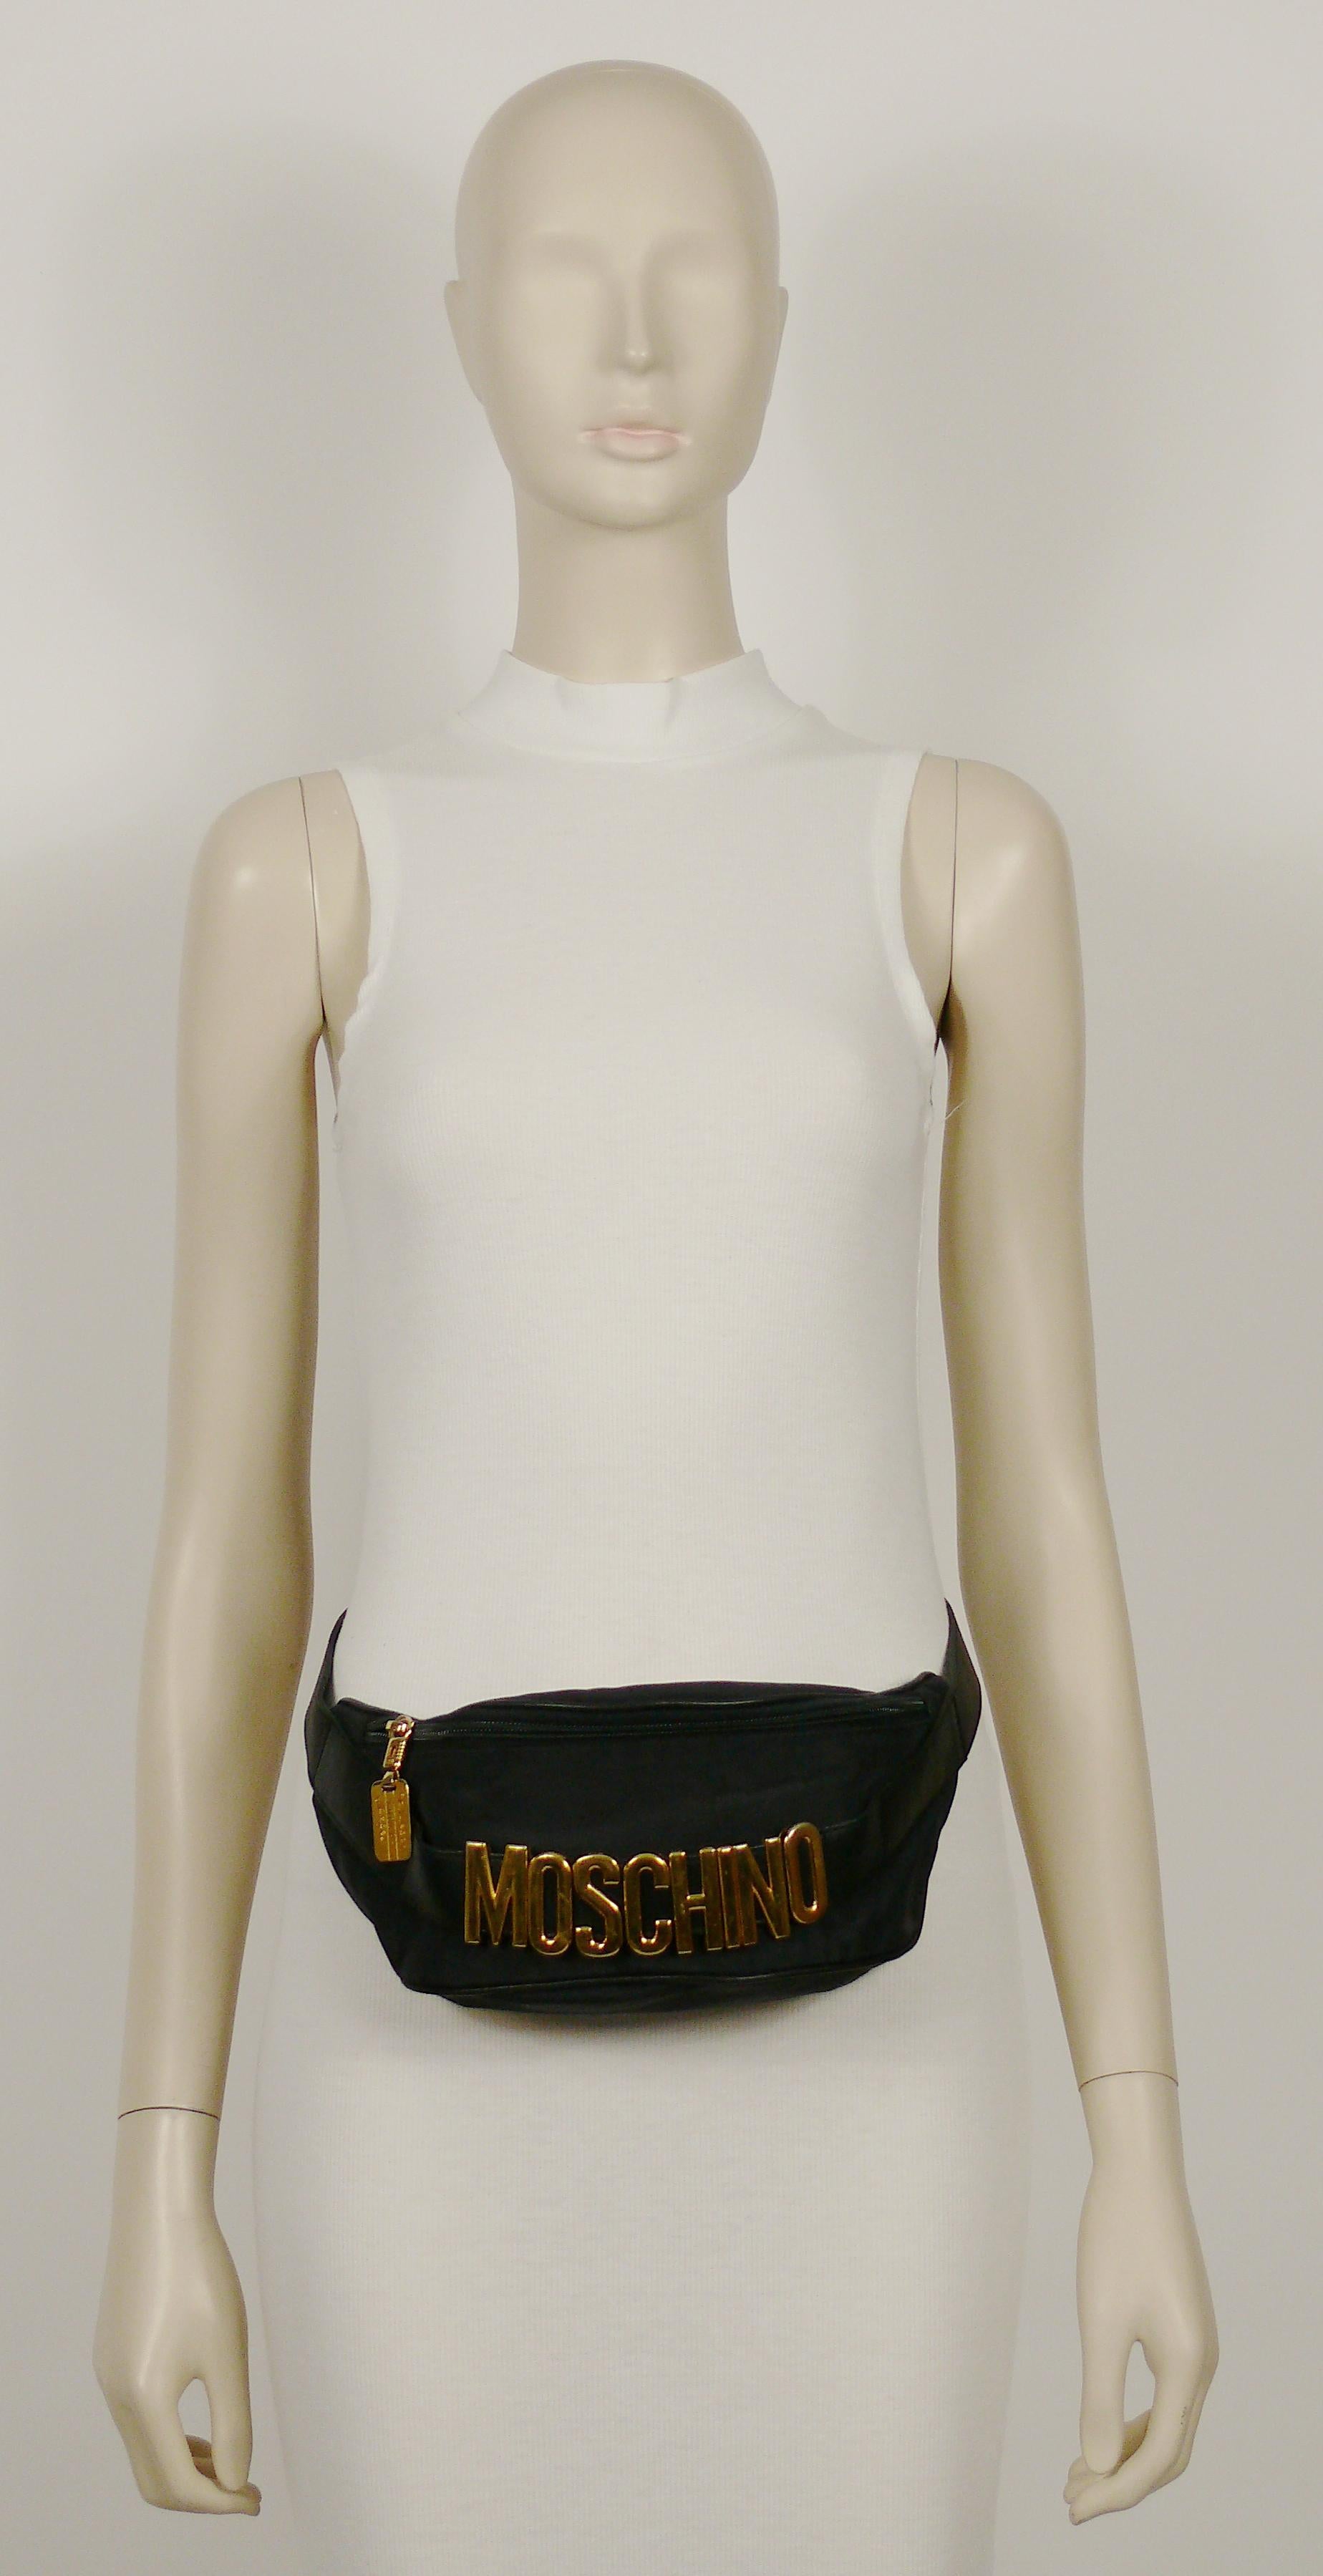 MOSCHINO by REDWALL vintage black fanny pack.

Thick nylon with leather strap and gold tone hardware.

One size fits all.
Adjustable leather straps.

Embossed Centropercento MOSCHINO Redwall Made in Italy.
Numbered model N°461002.
Black REDWALL logo